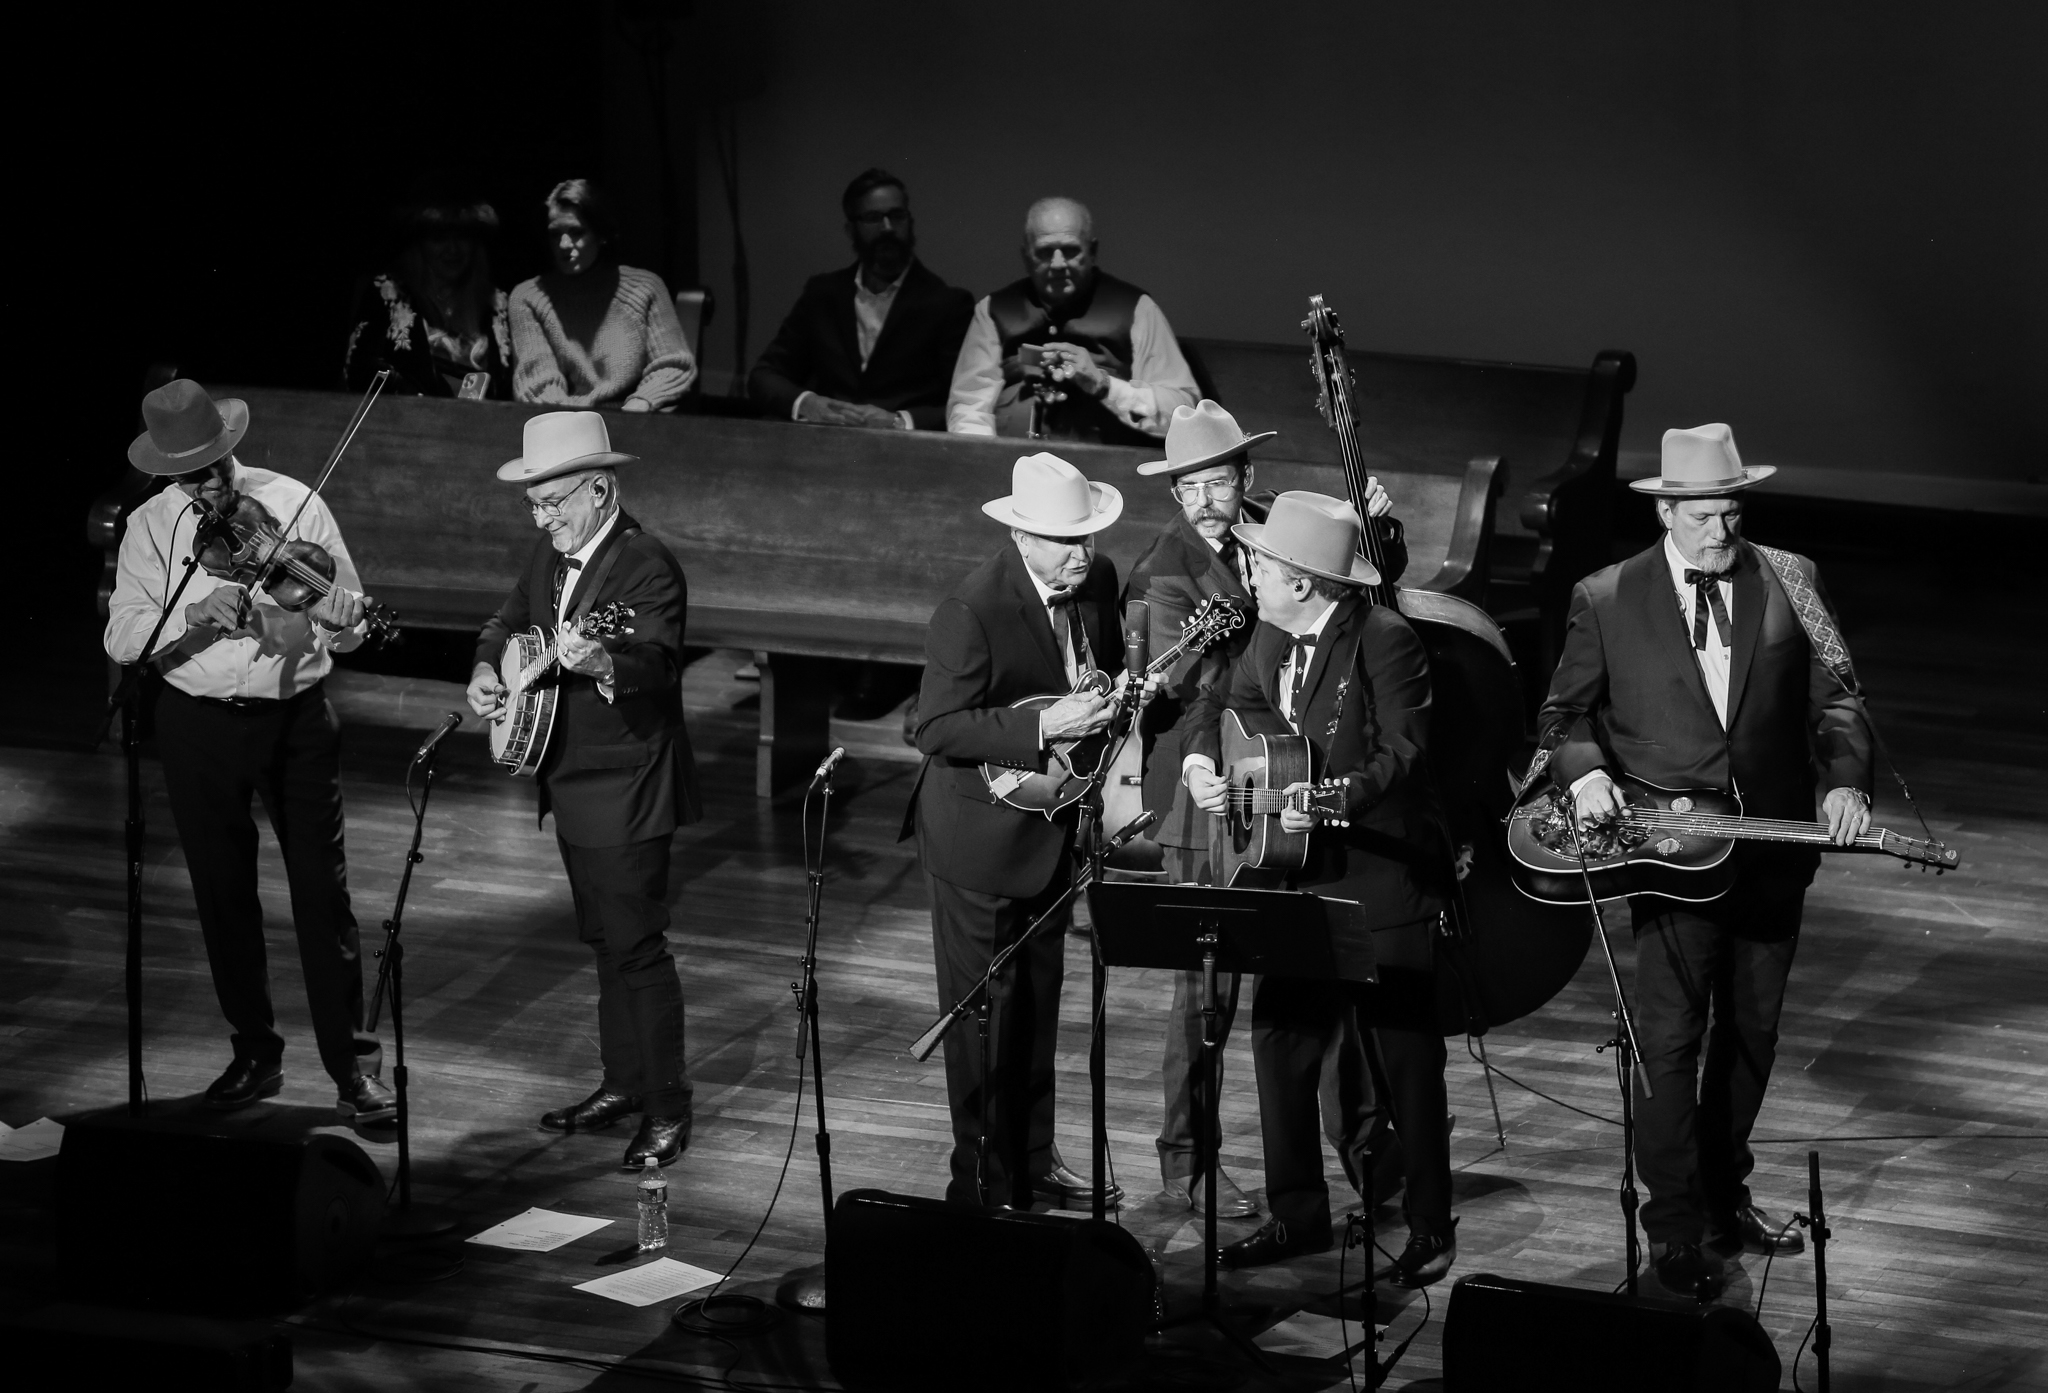 Light Shifter studios photographs a great show at the Ryman. 